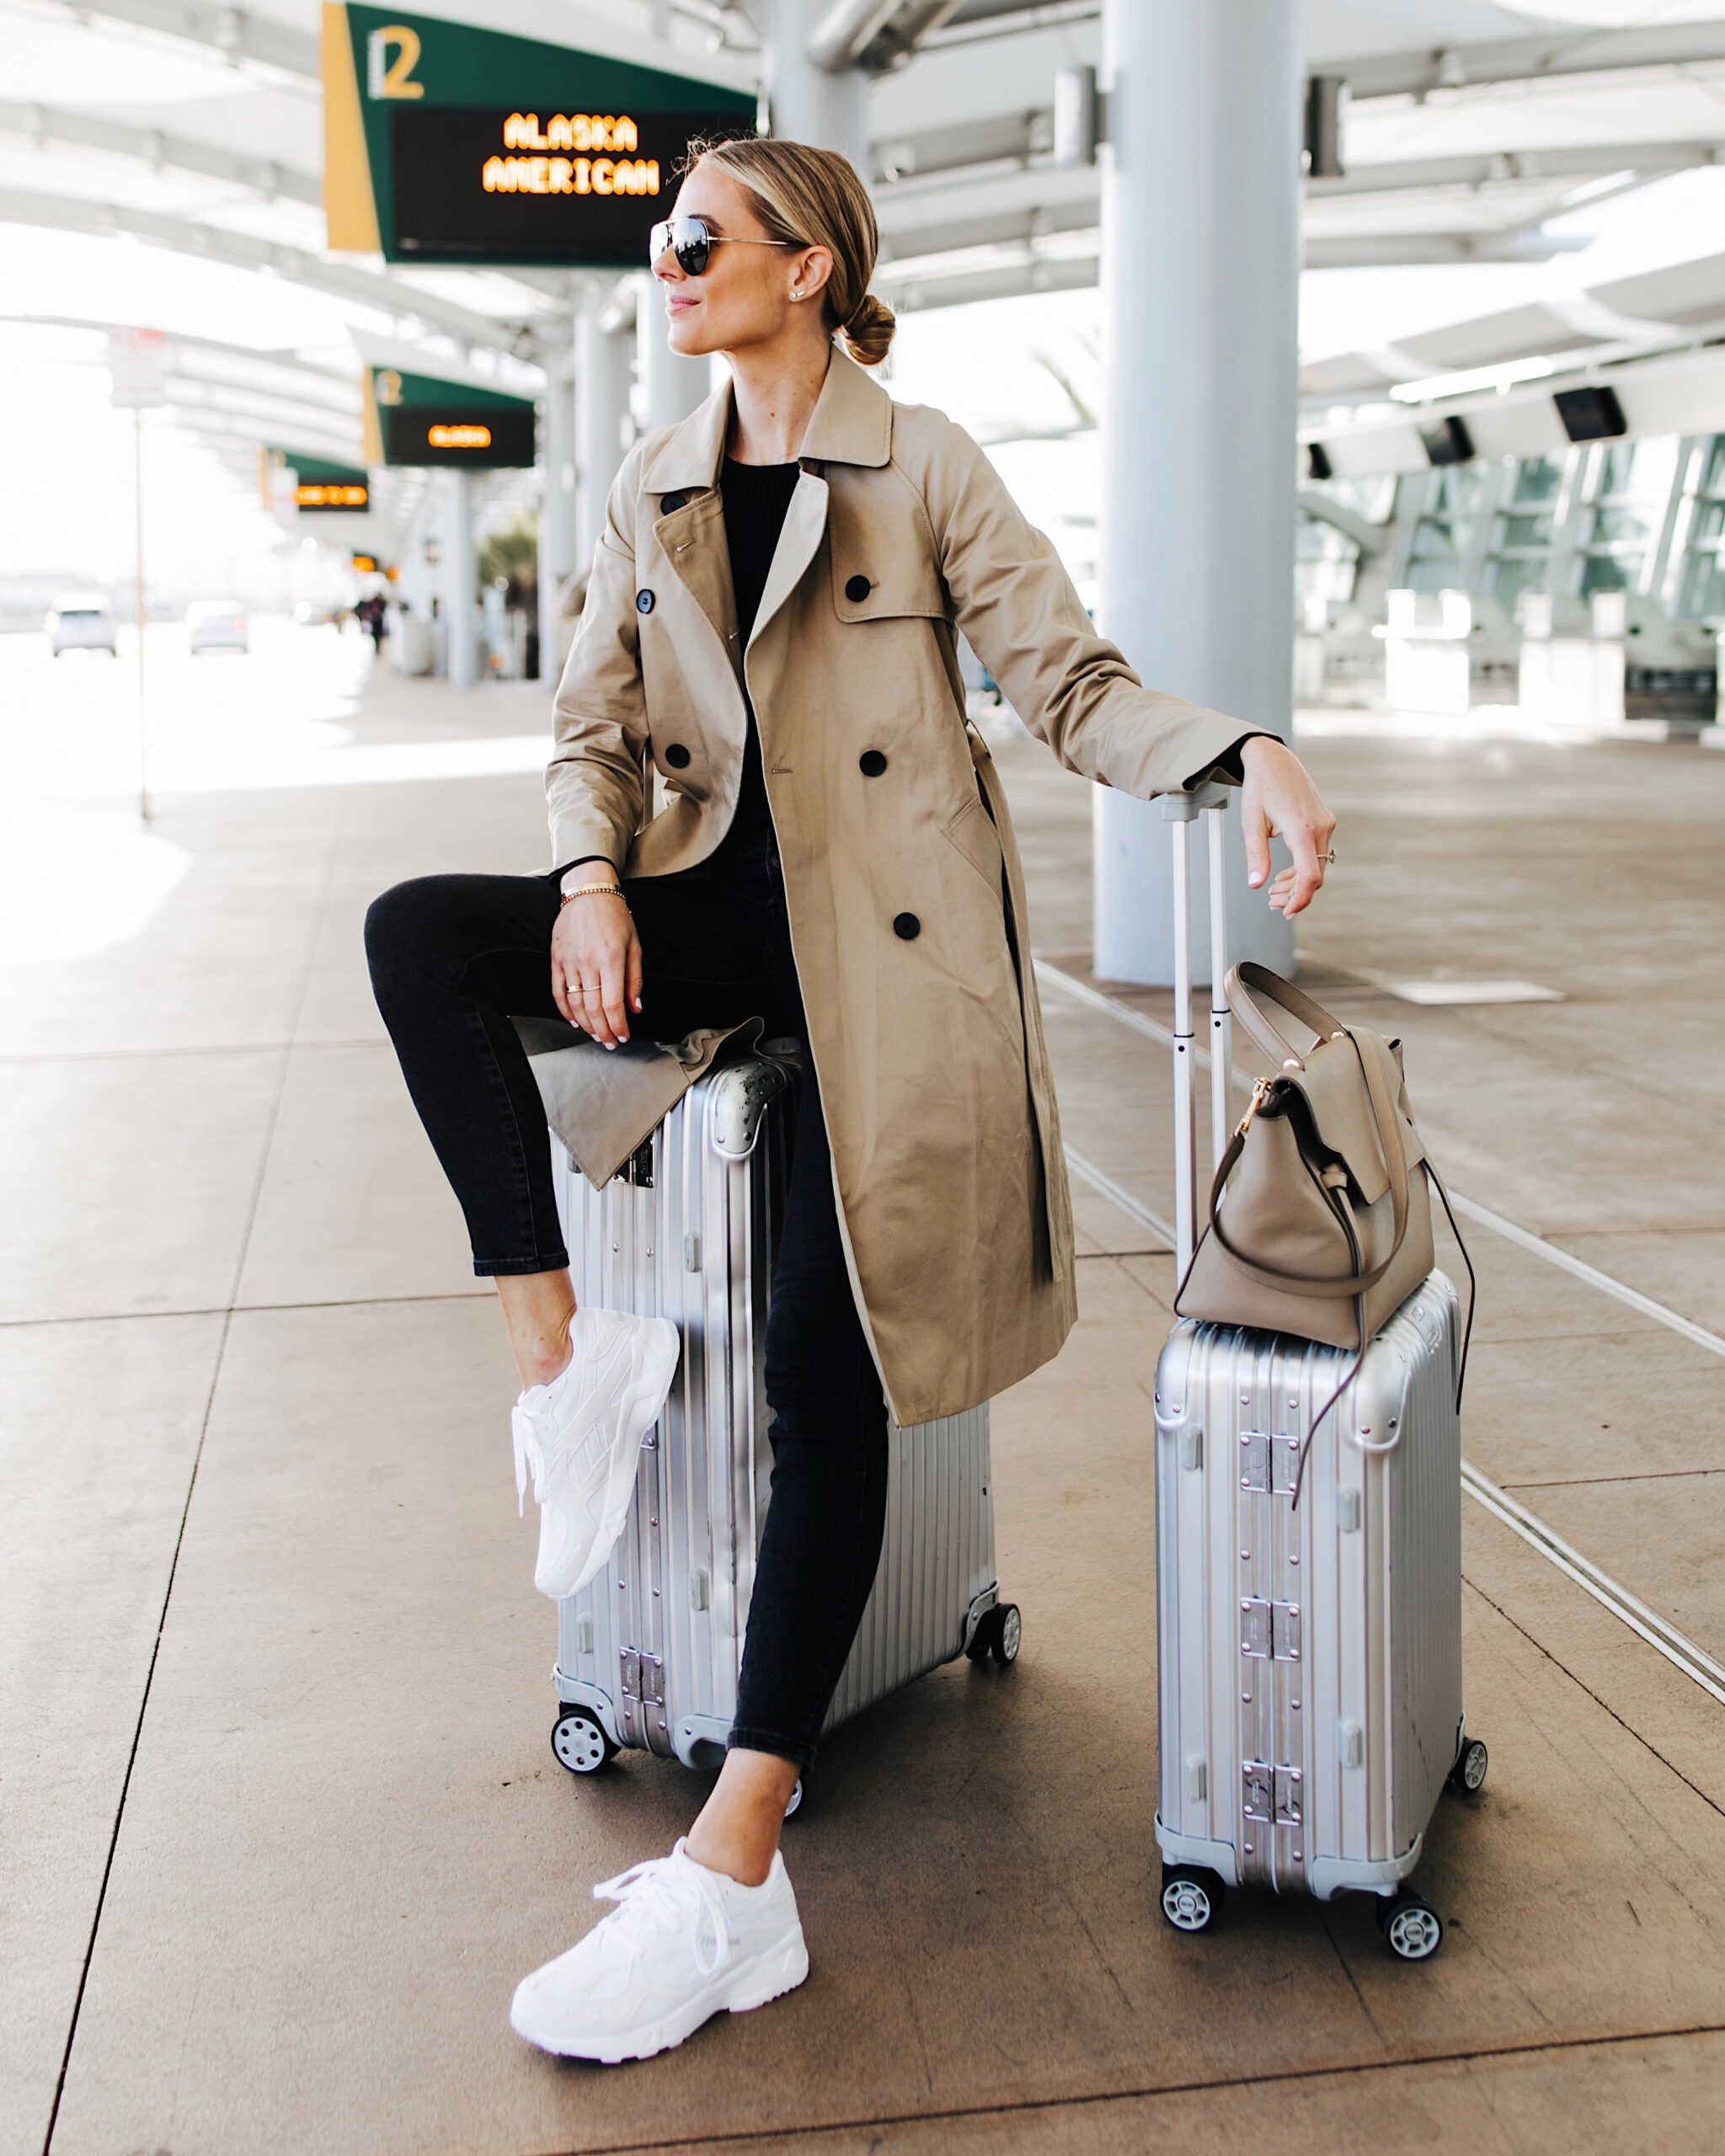 Airport Travel Outfits I am loving #flarejeansoutfit #jeanoutfits #jea